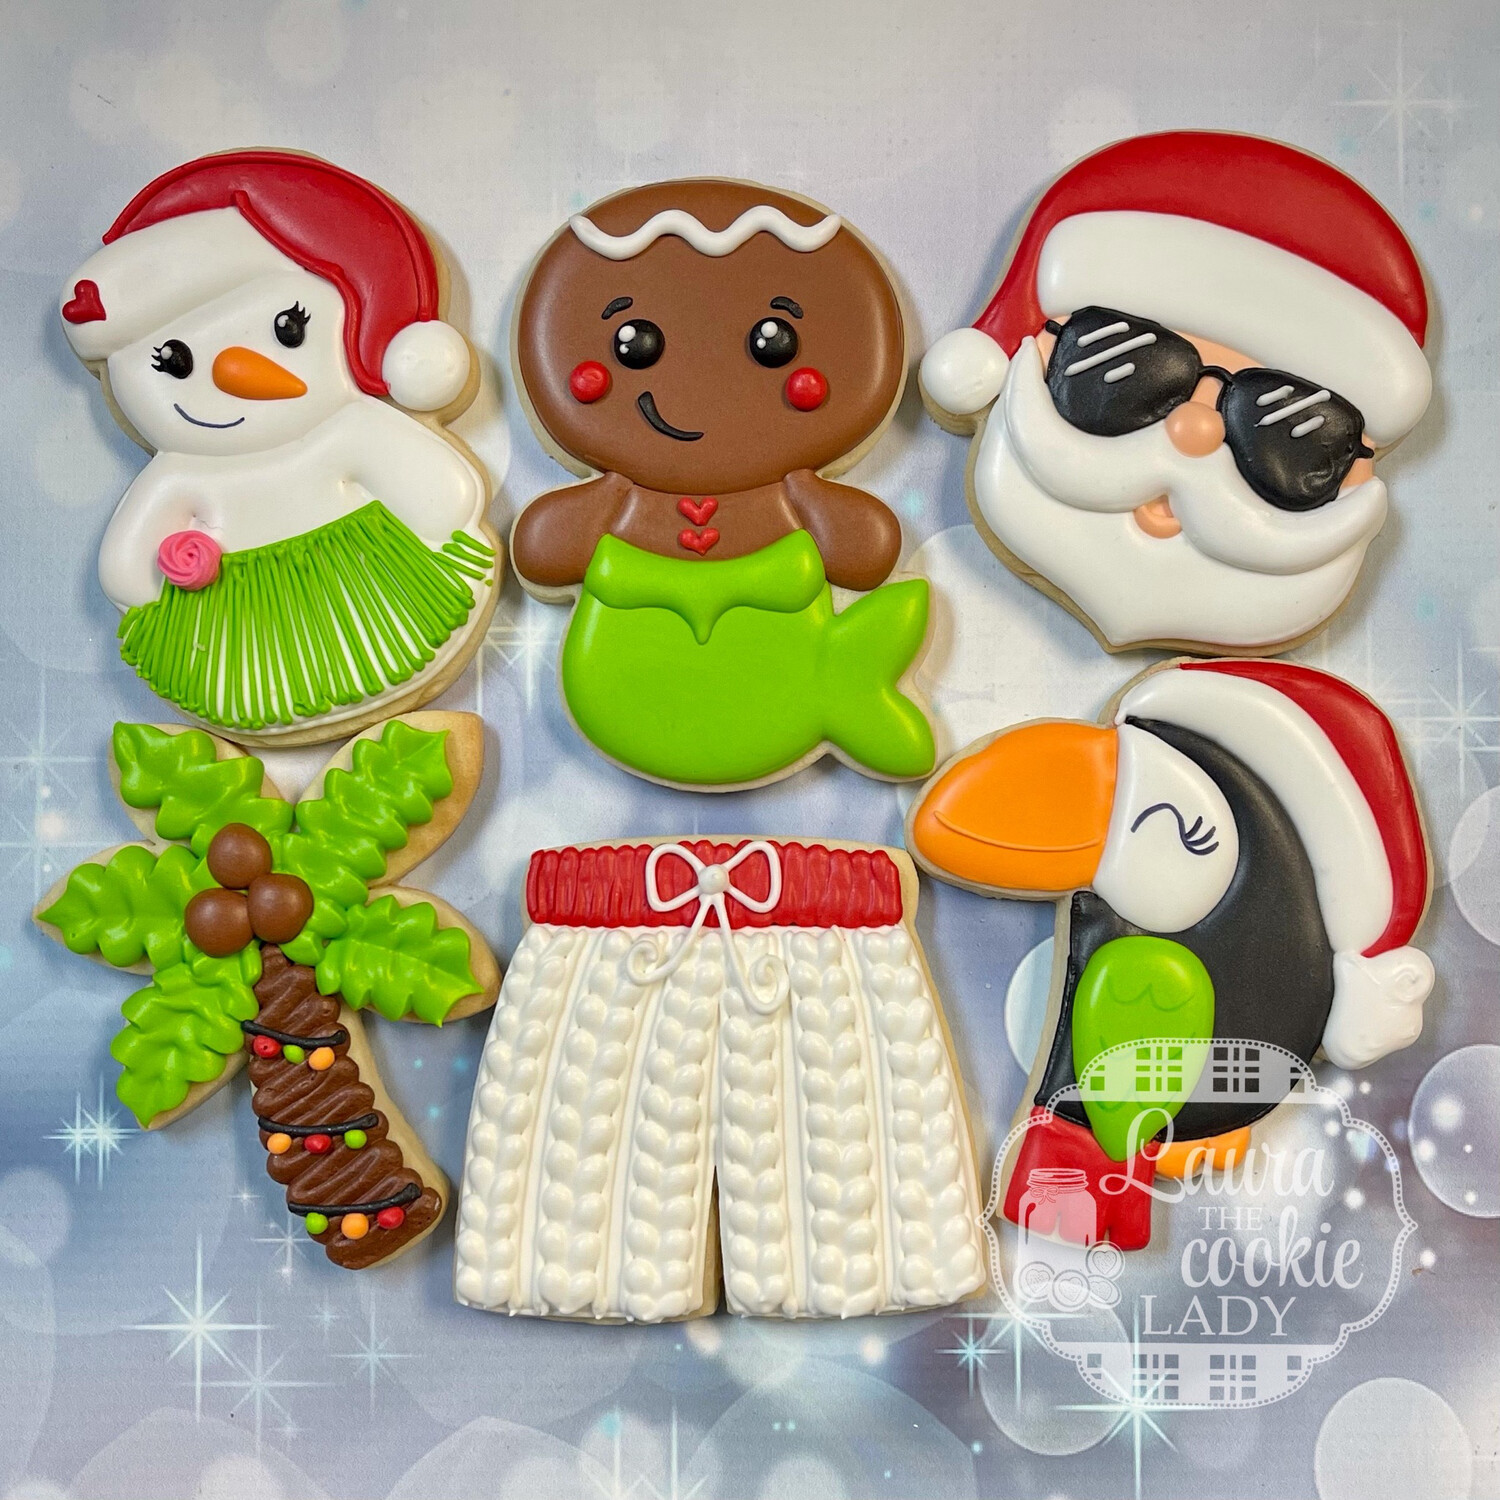 Christmas in July Decorating Class Tuesday July 11 6-8pm